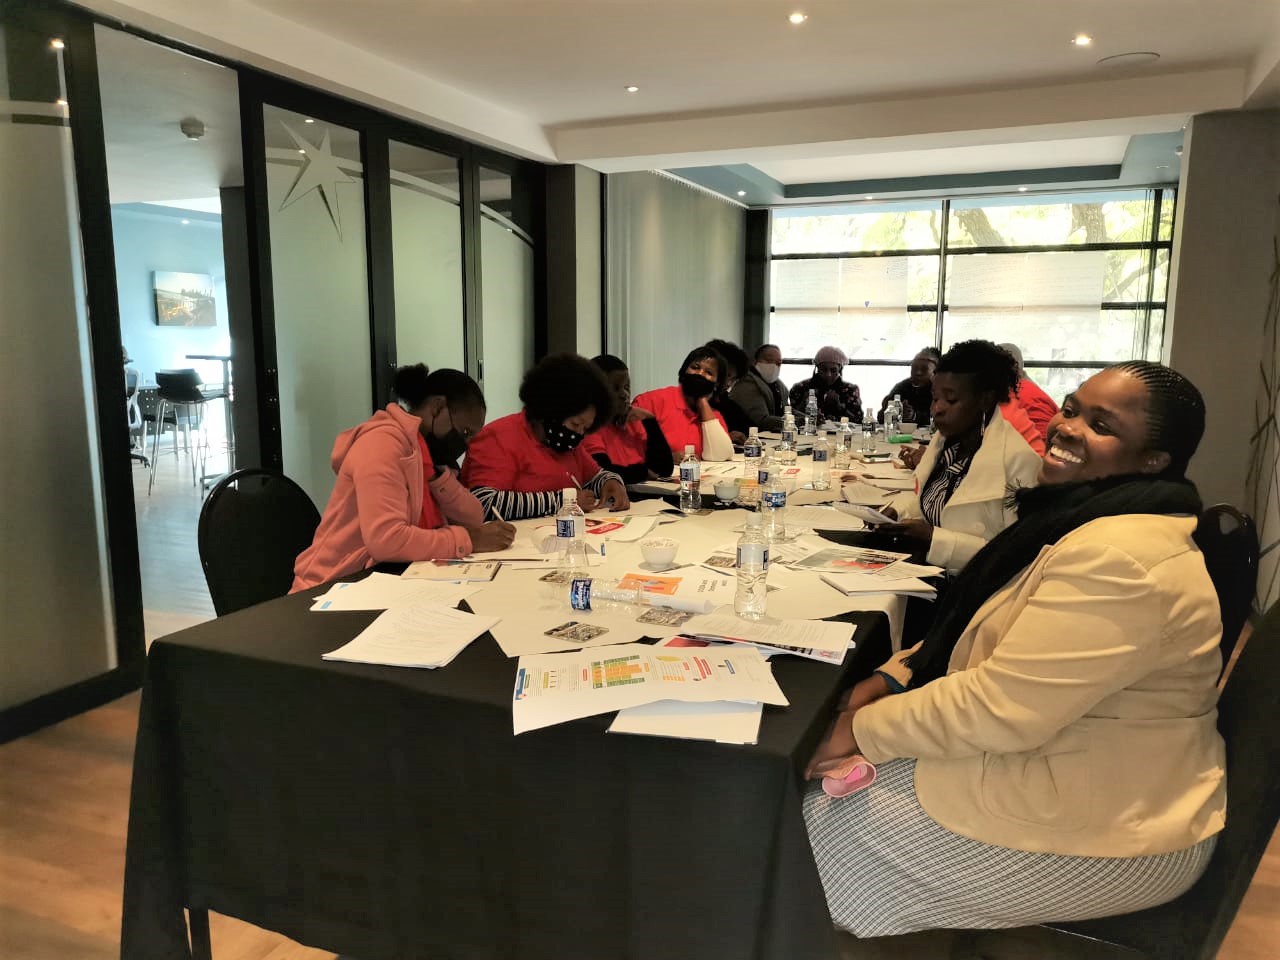 The Domestic Workers UIF/COIDA Advocacy Workshop May 2022 in Pretoria